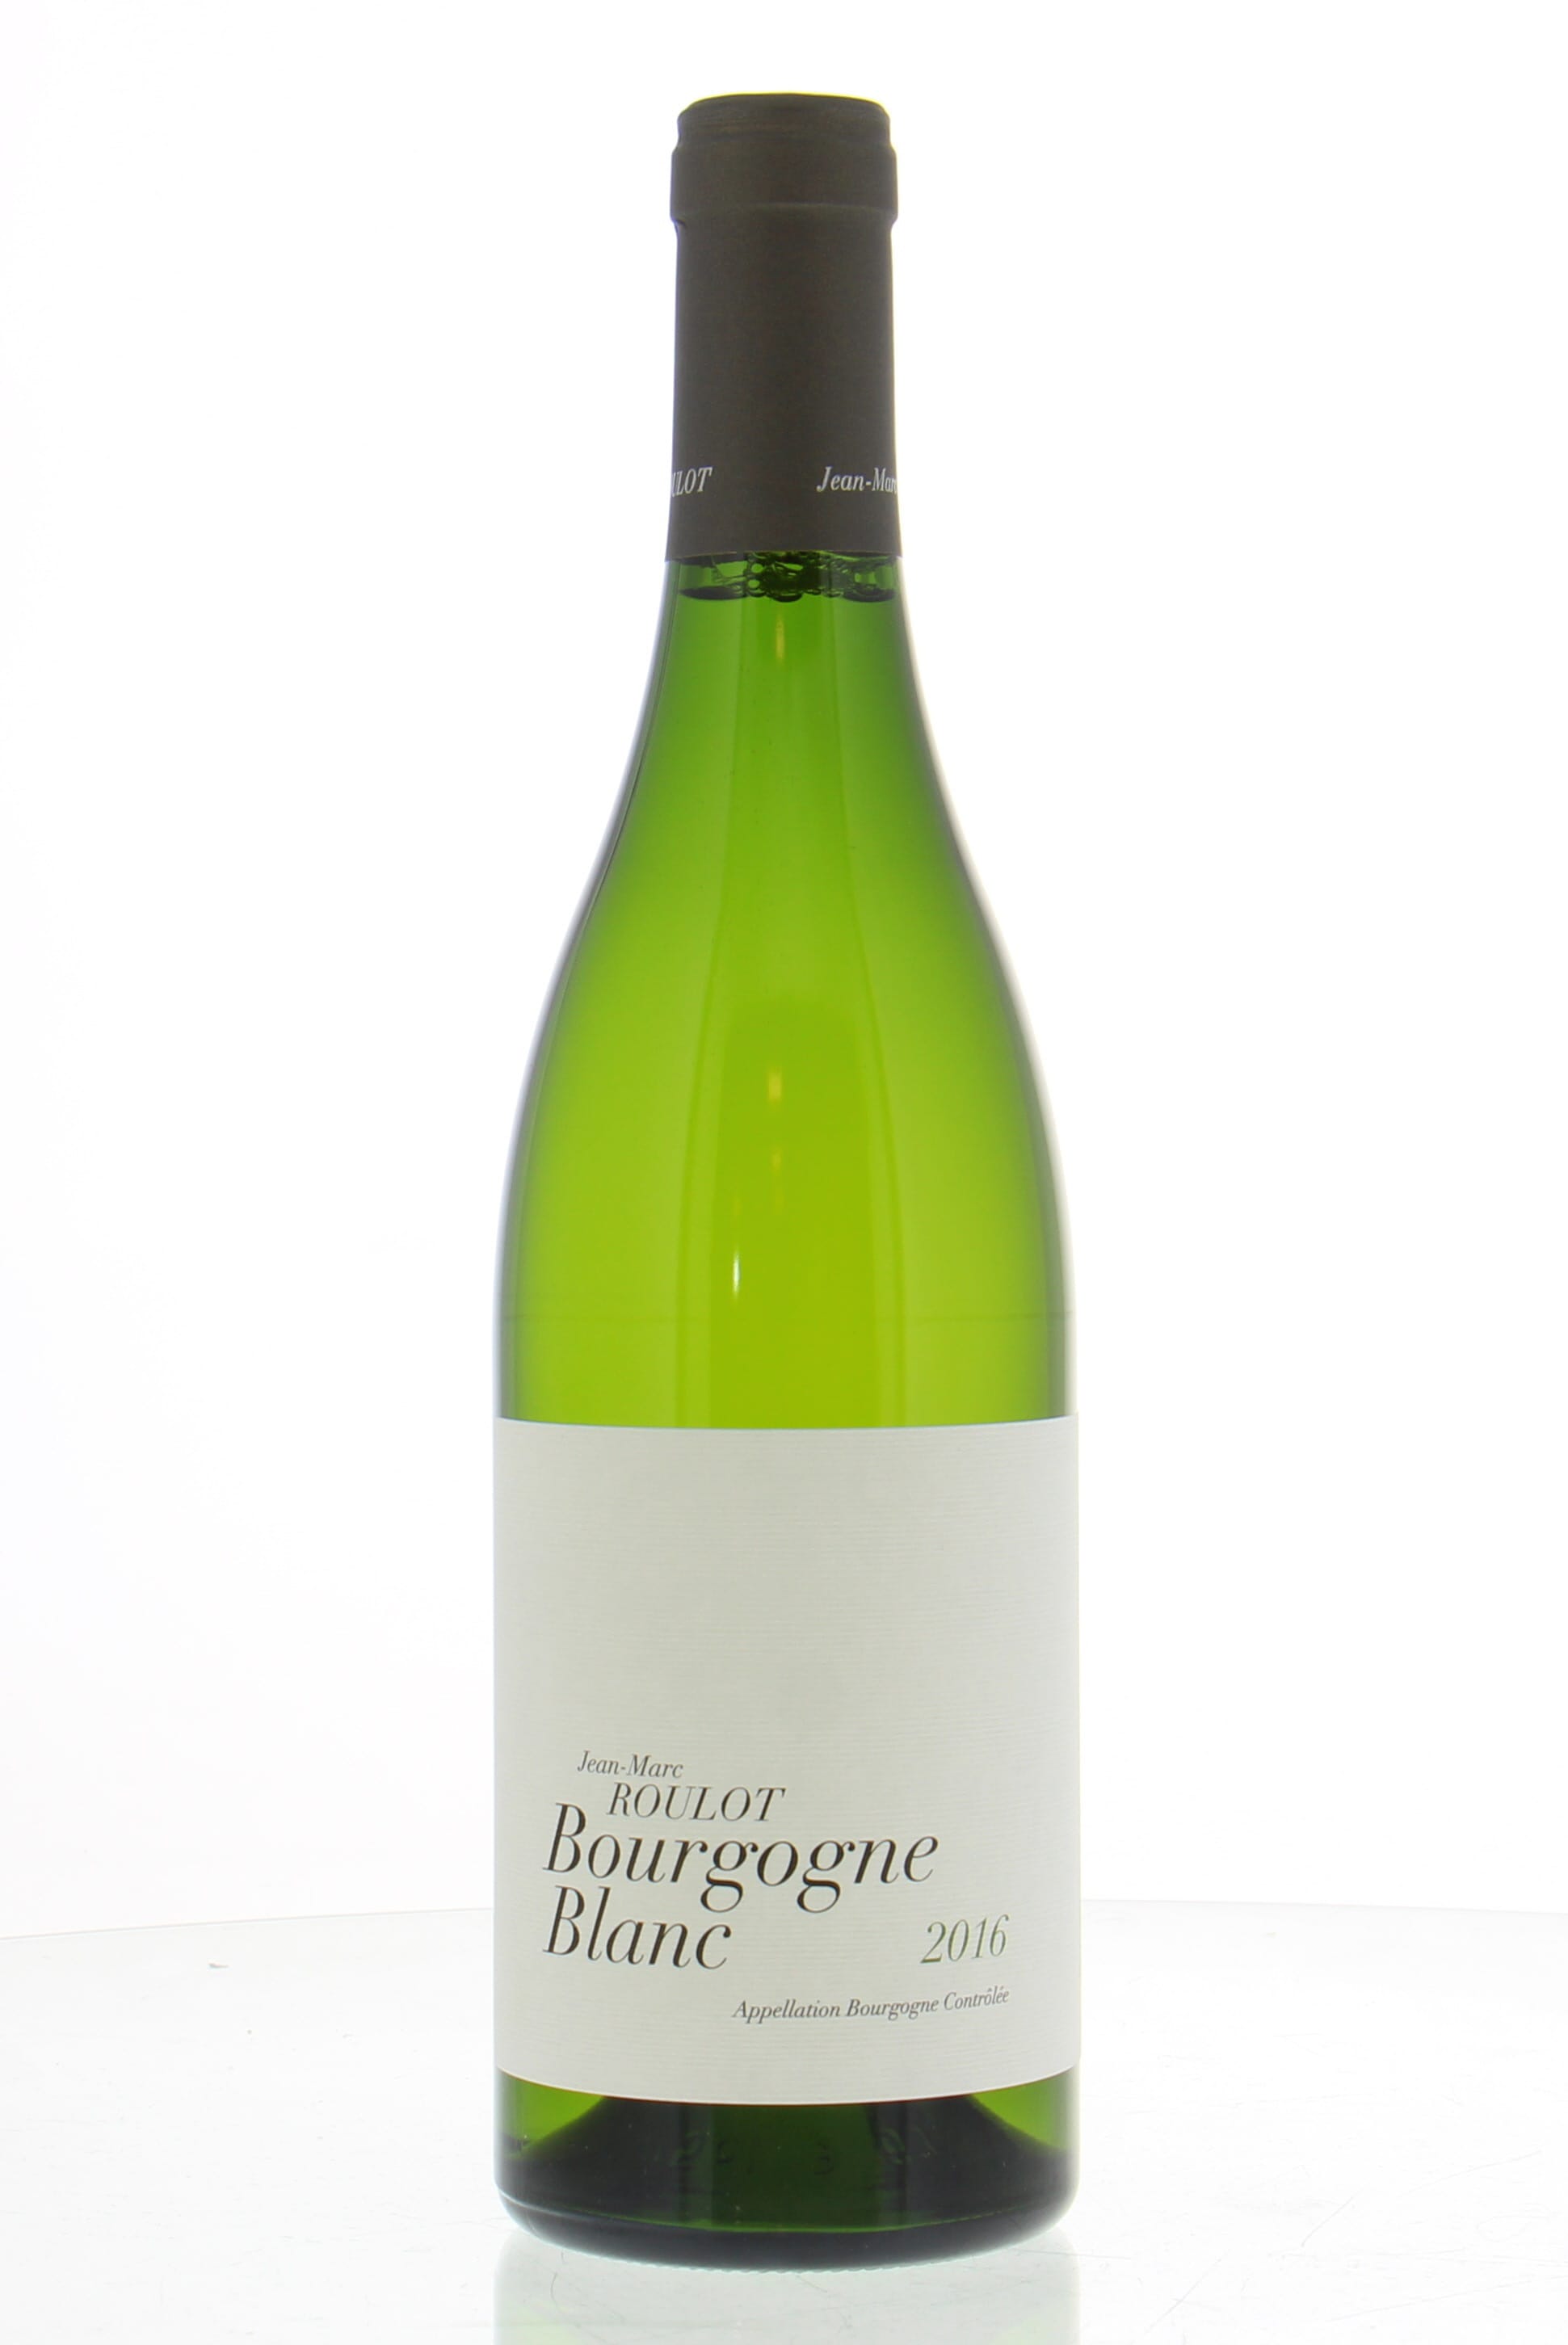 Guy Roulot - Bourgogne Blanc 2016 Perfect